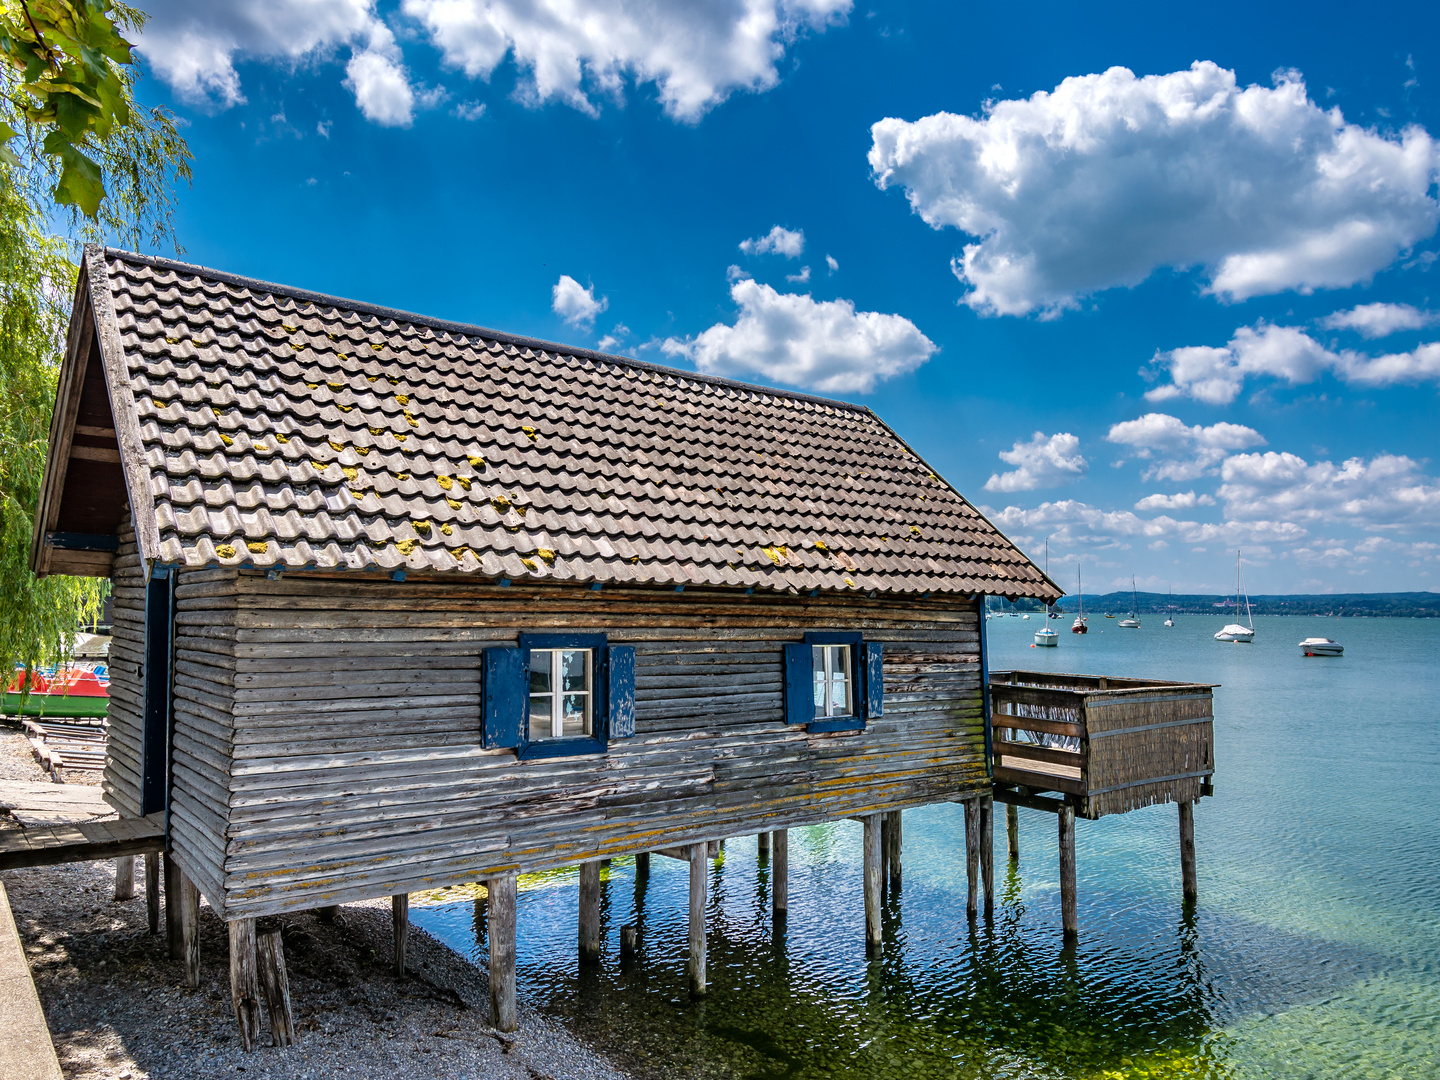 BOATS HOUSE / HERRSCHING AM AMMERSEE